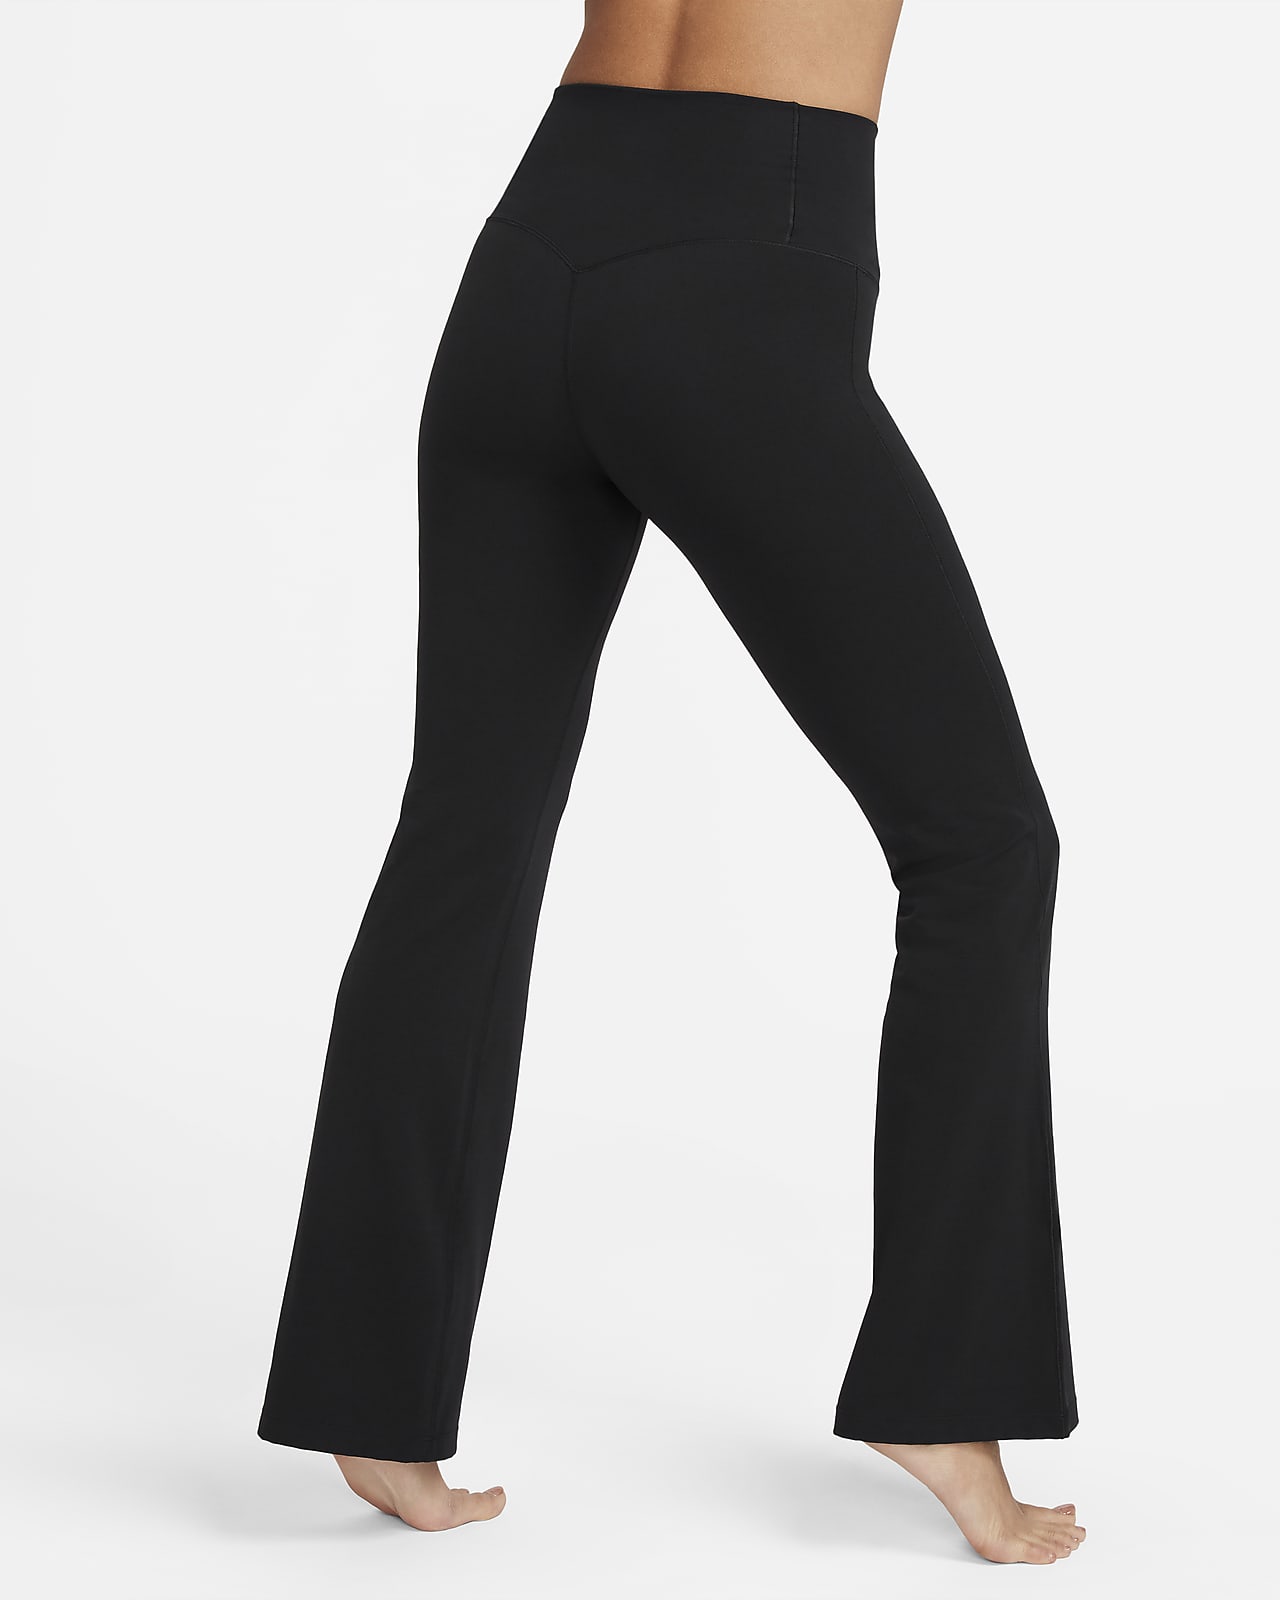 Yoga Pants for Women High Waisted Lightweight Flare Workout